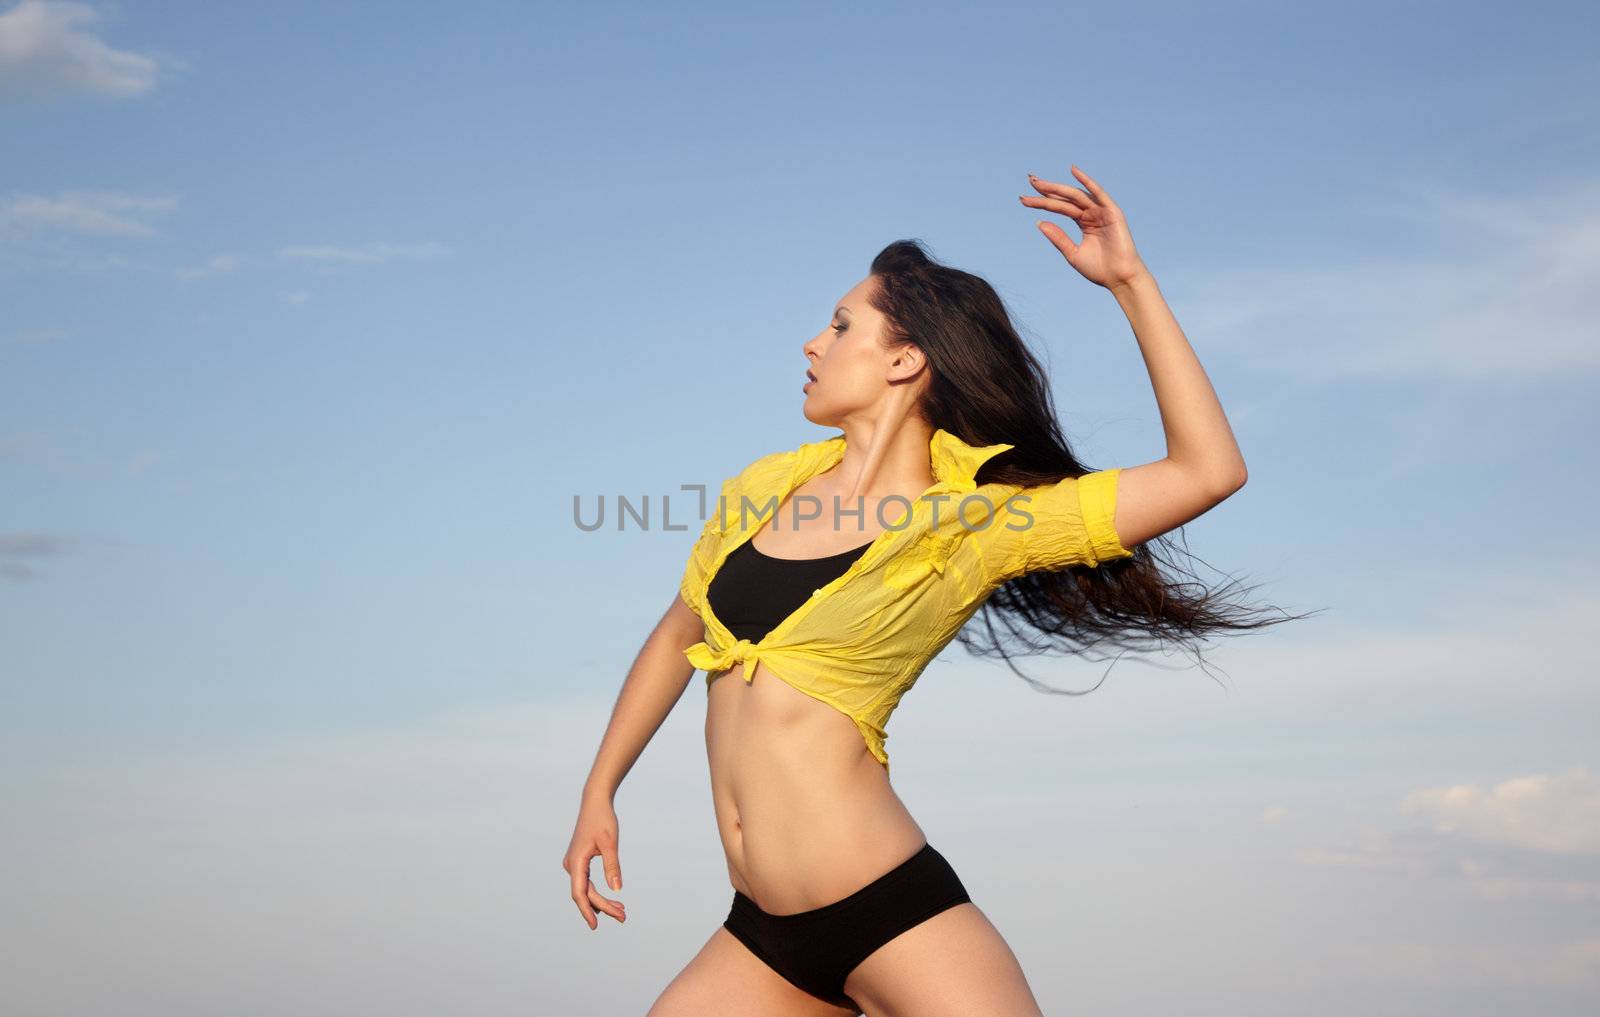 Woman doing sportive exercise outdoors on a blue sky background